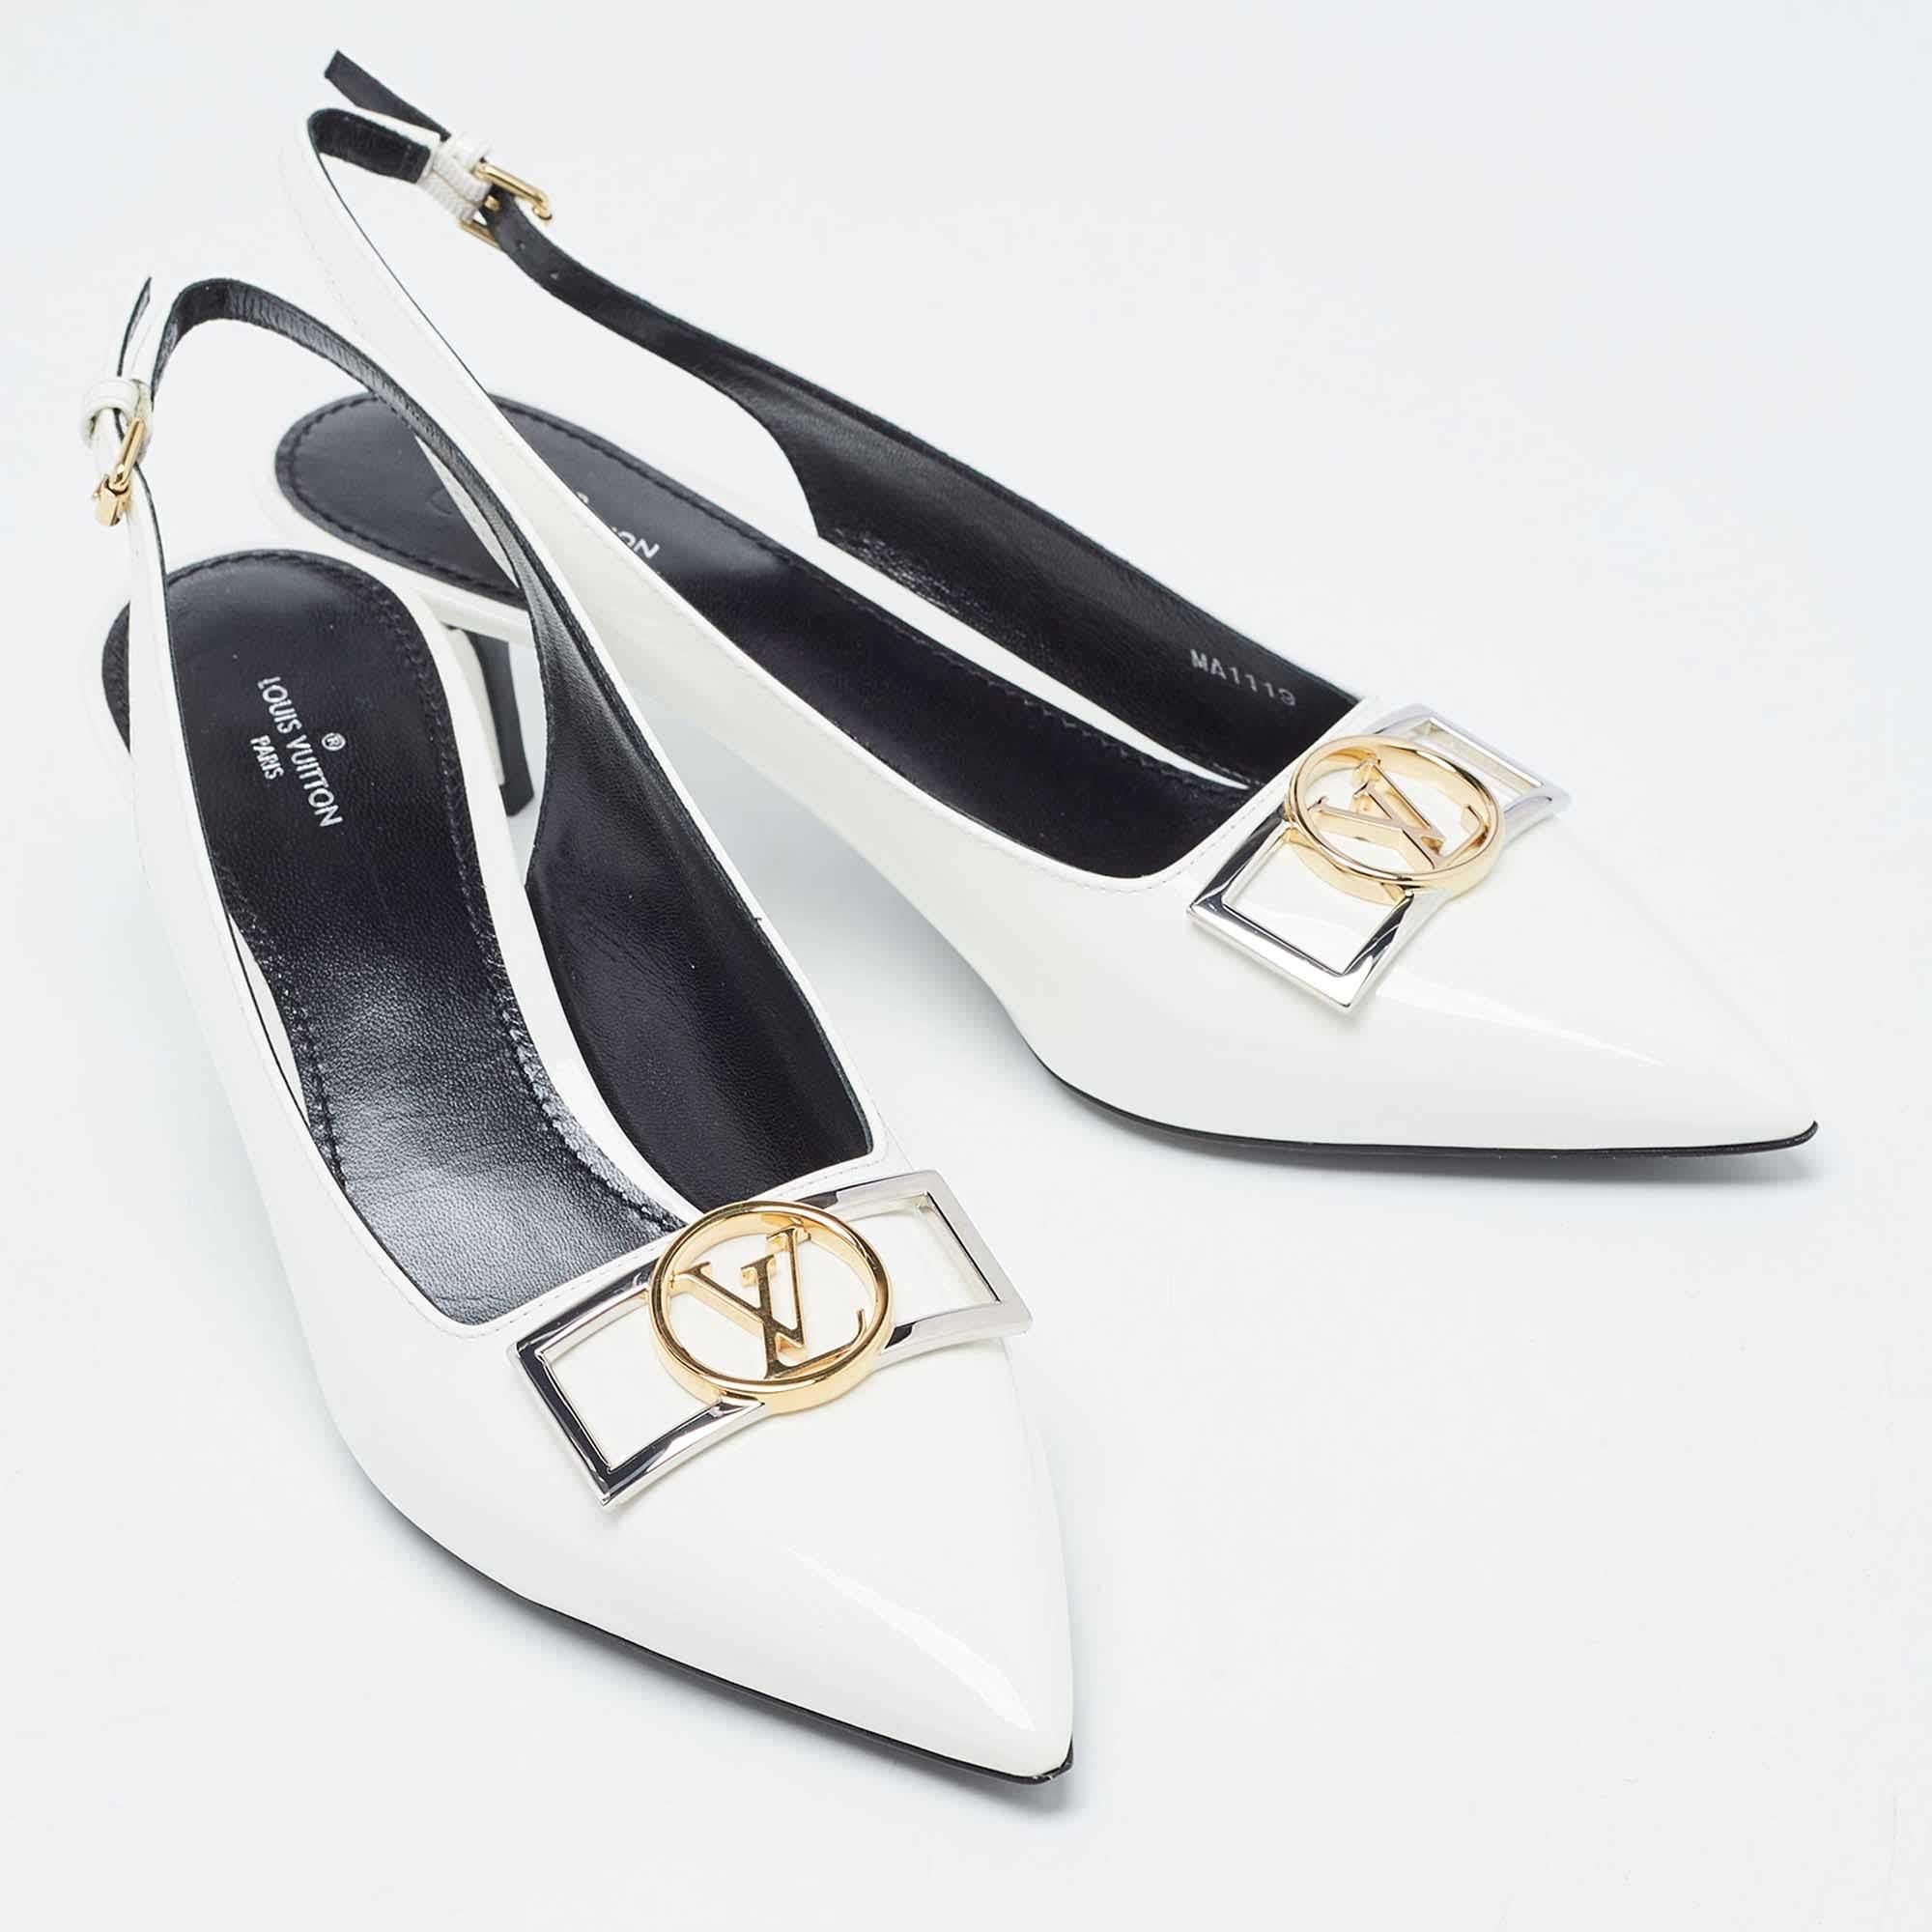 Crafted in a classy hue, we love these LV white pumps. Designed to make a statement, they have a sleek silhouette and a nice fit. Wear yours under maxi skirts for a peek of glamour, or let them shine with cropped hemlines.

